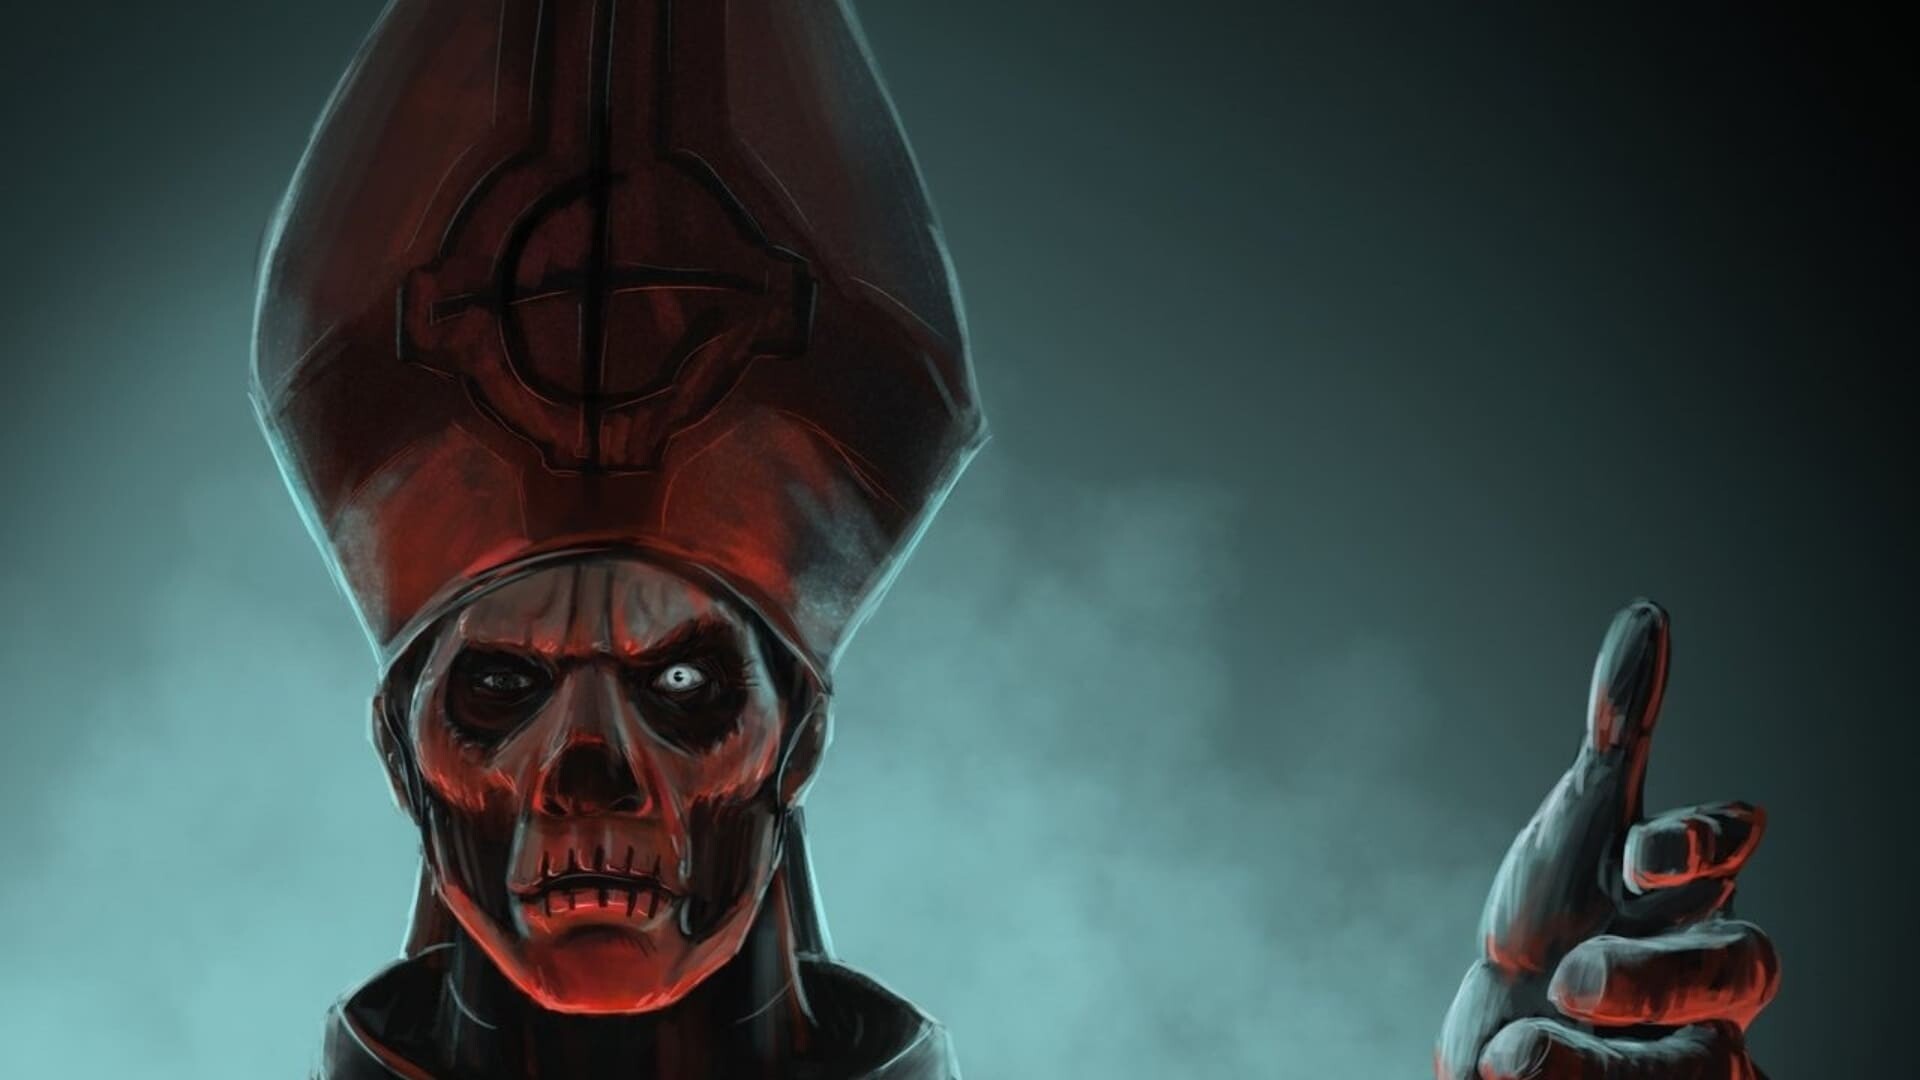 Ghost (Band): A member of the Group of Nameless Ghouls, A Ghoul Writer, Cardinal Copia. 1920x1080 Full HD Background.